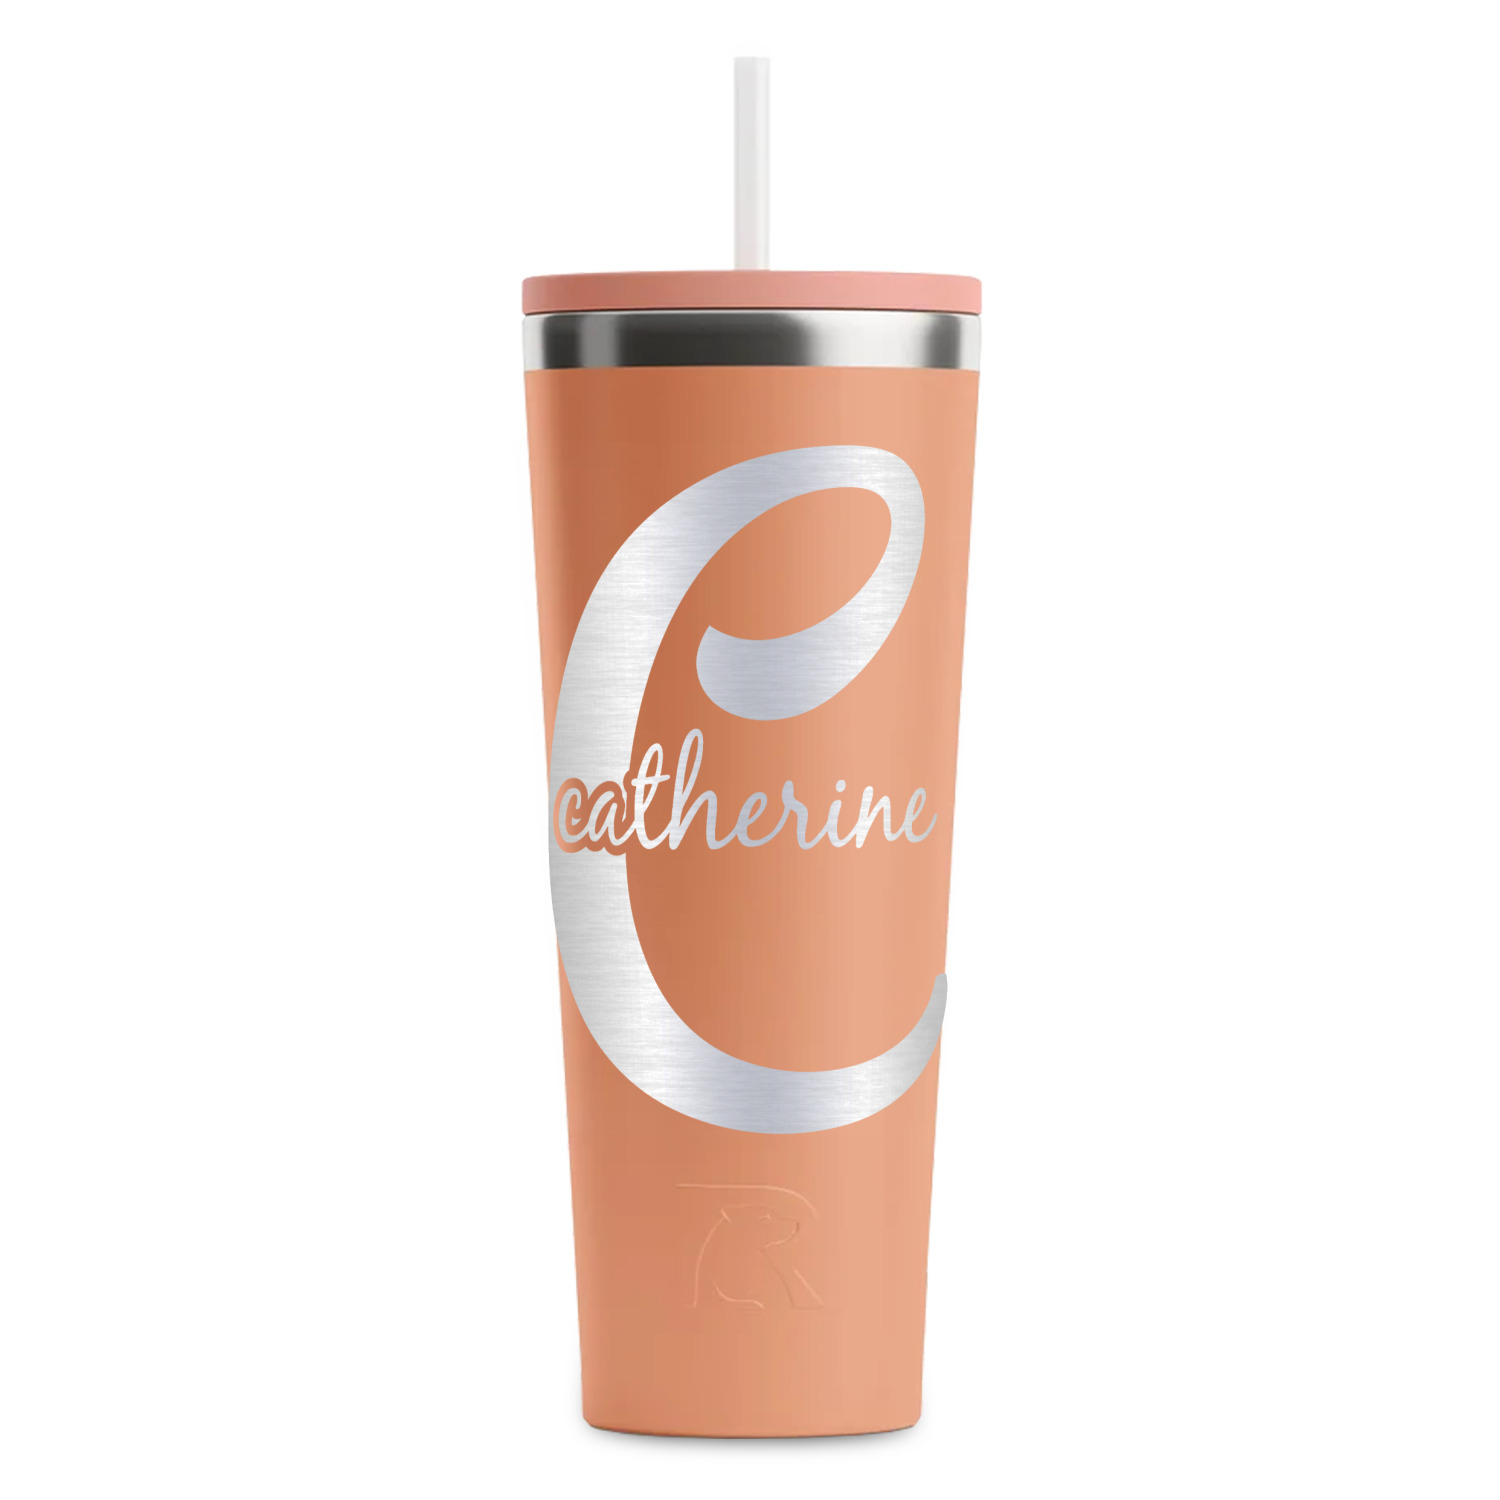 https://www.youcustomizeit.com/common/MAKE/837763/Name-Initial-Girly-Peach-RTIC-Everyday-Tumbler-28-oz-Front.jpg?lm=1698259133